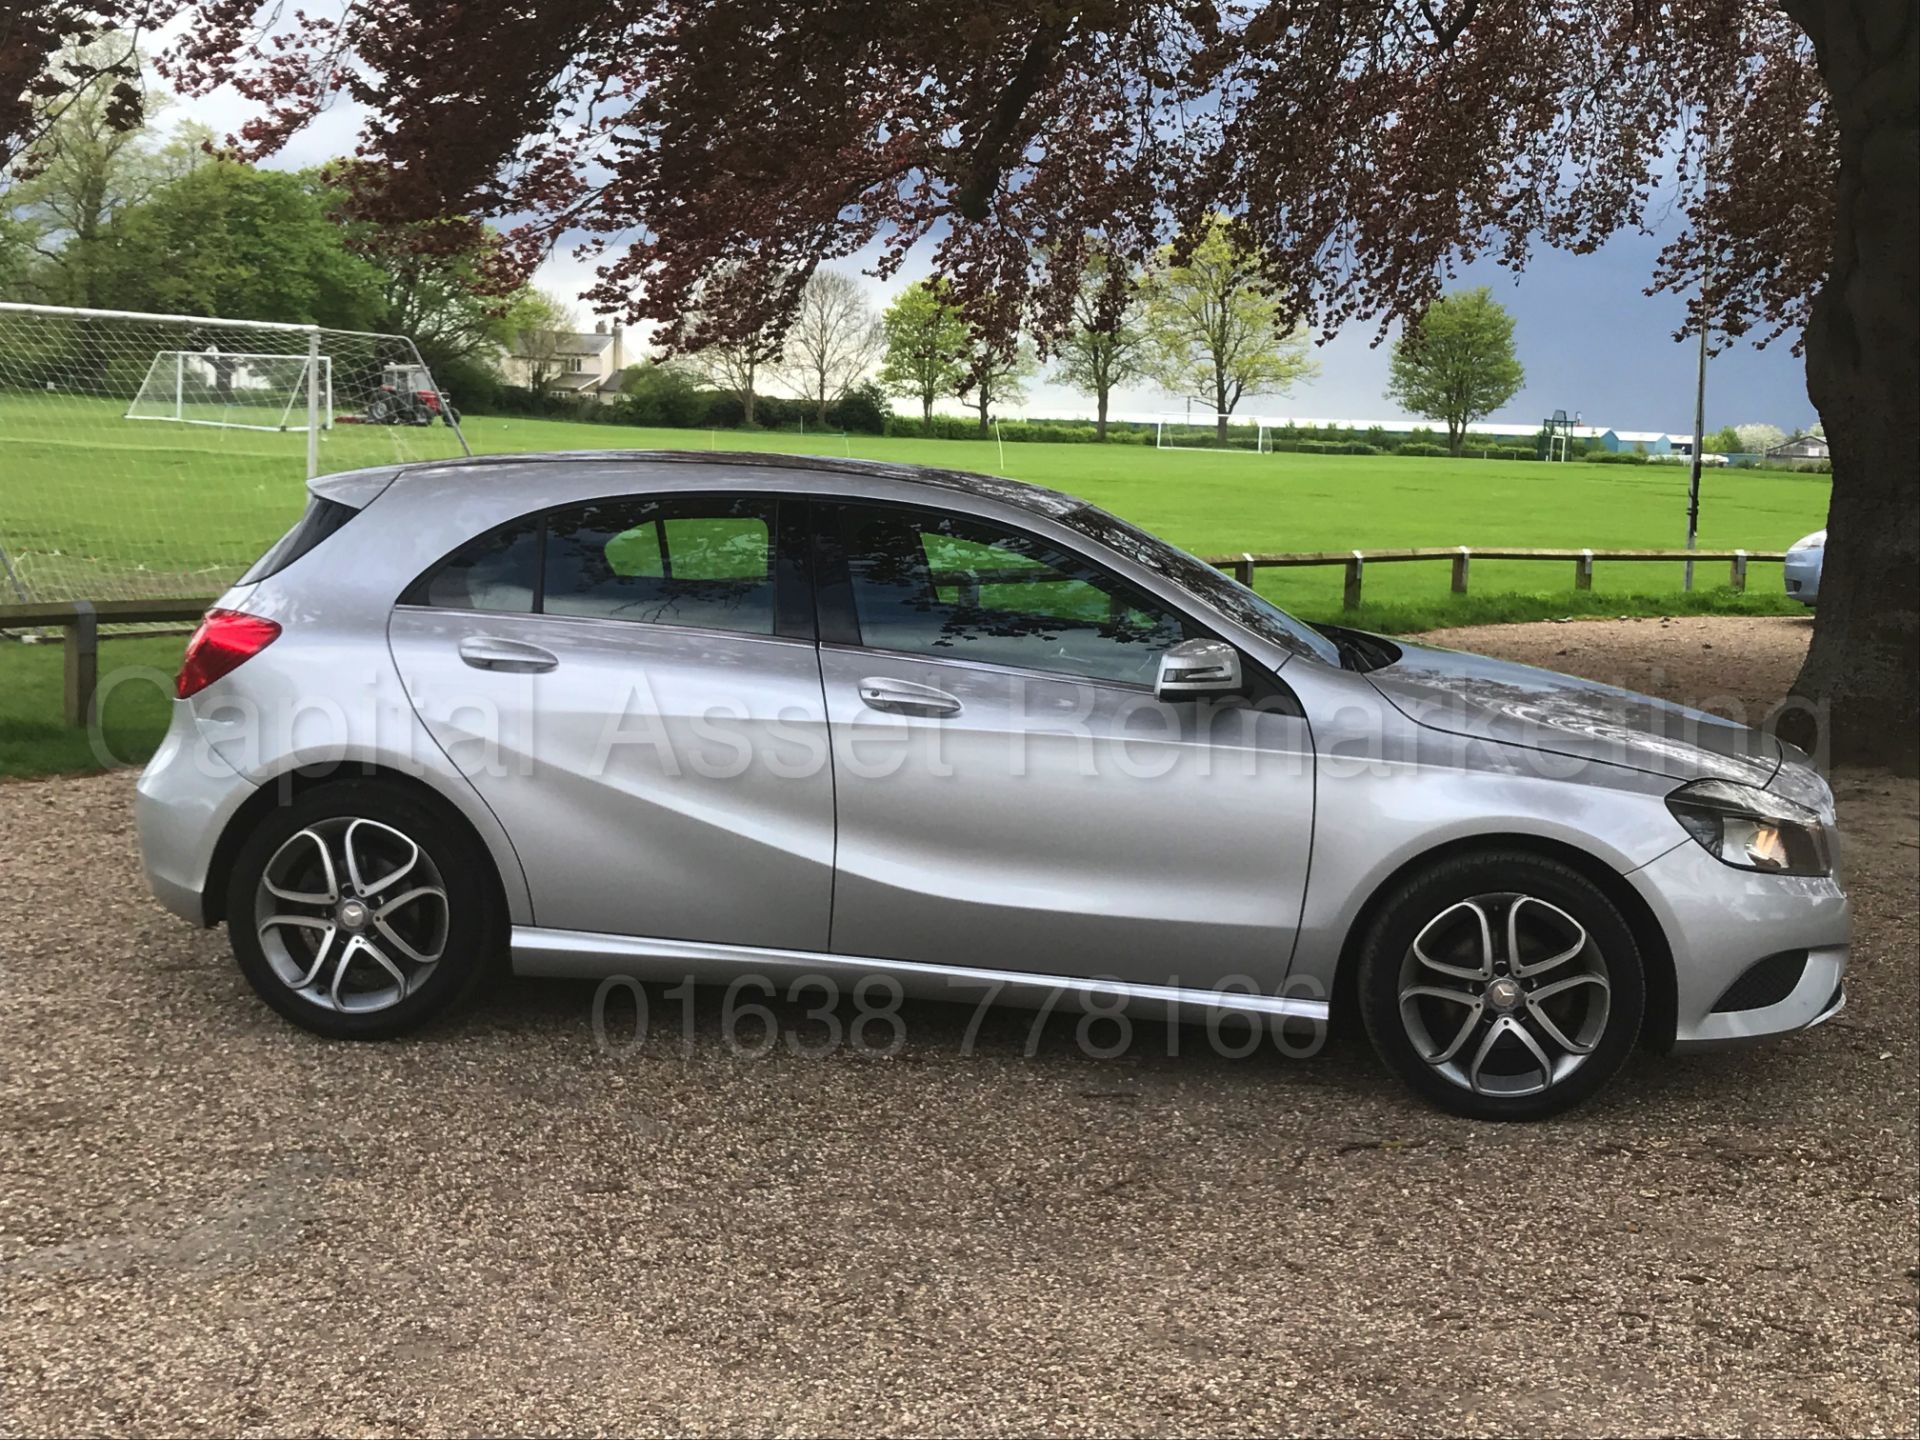 (On Sale) MERCEDES-BENZ A180 CDI 'SPORT EDITION' (2015) 'LEATHER - SAT NAV - STOP/START' (1 OWNER) - Image 13 of 36